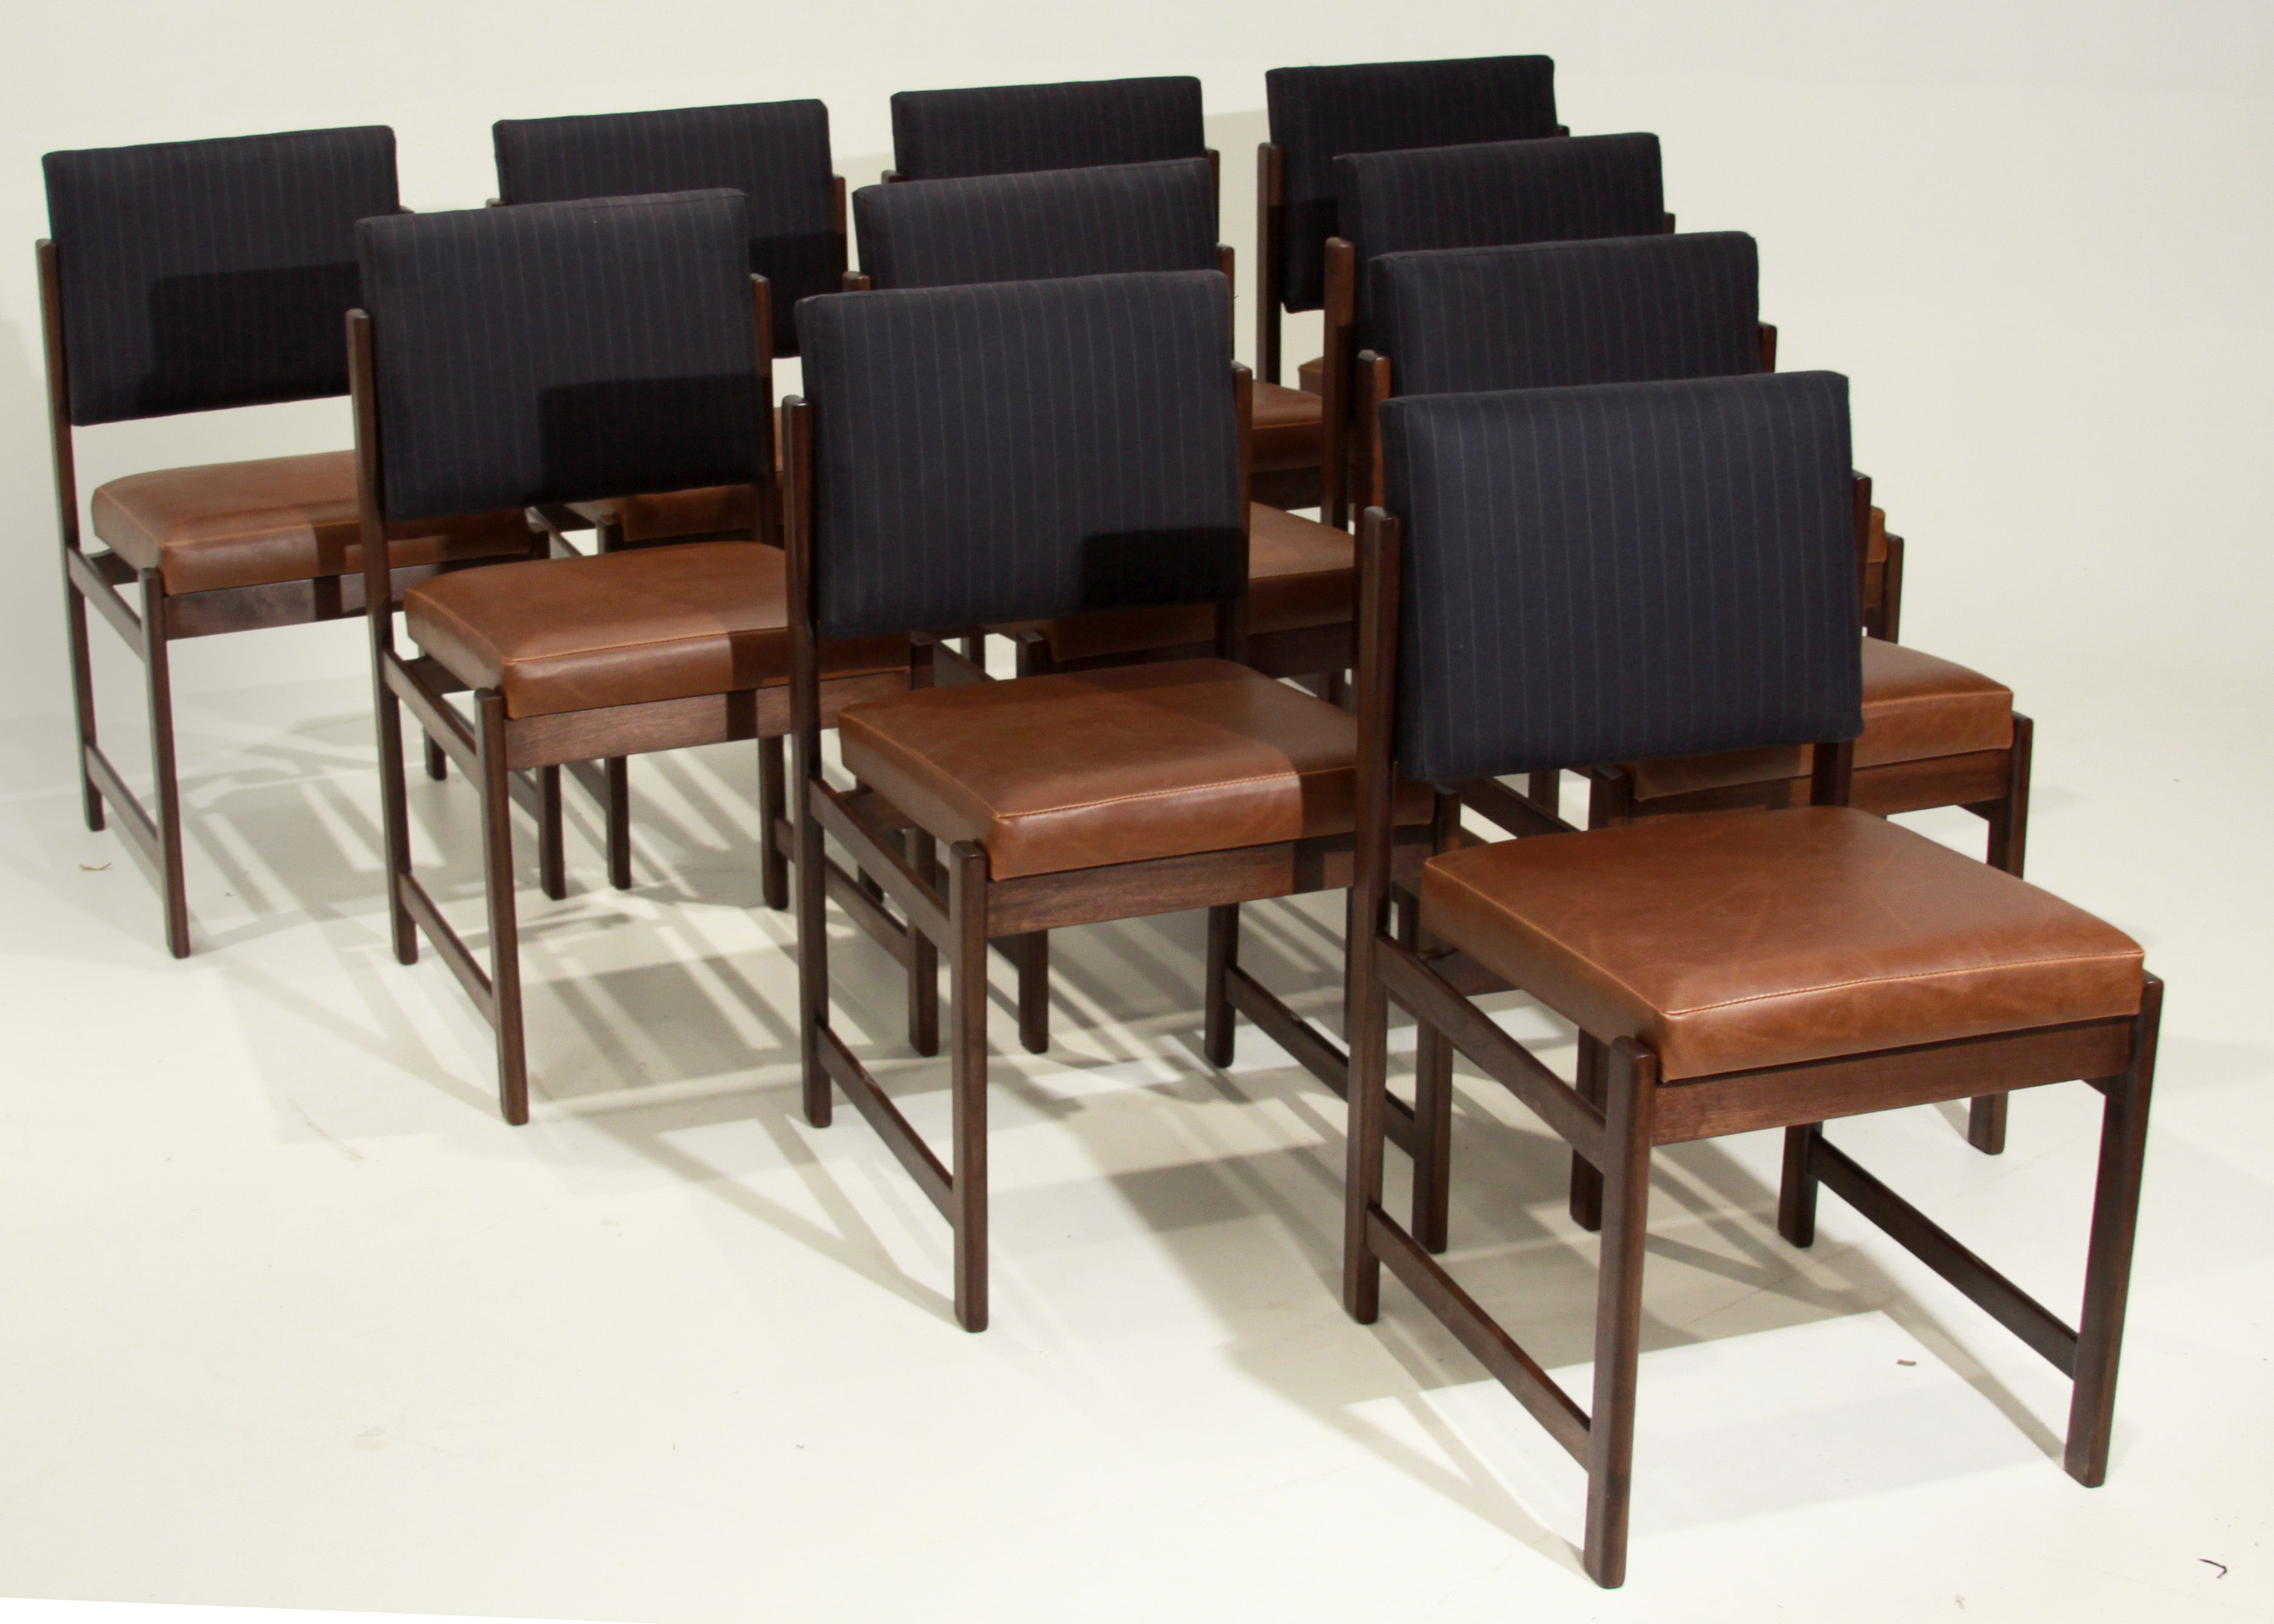 The Basic Dining Chairs by Thomas Hayes Studio